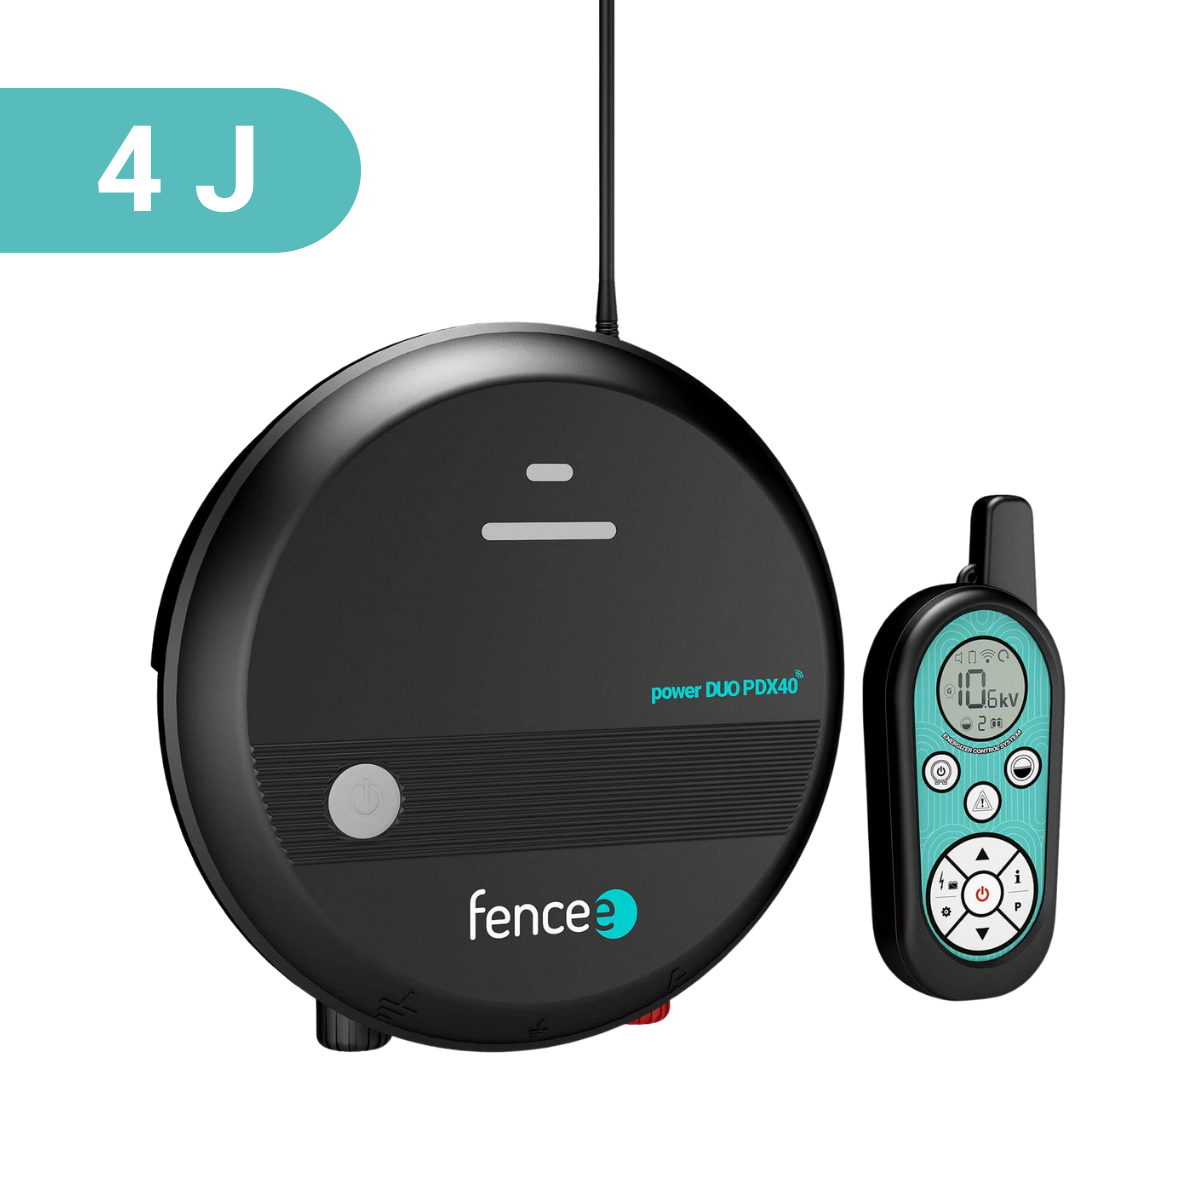 Electric fence energizer with remote control Fencee power DUO RF PDX40 12V/230V